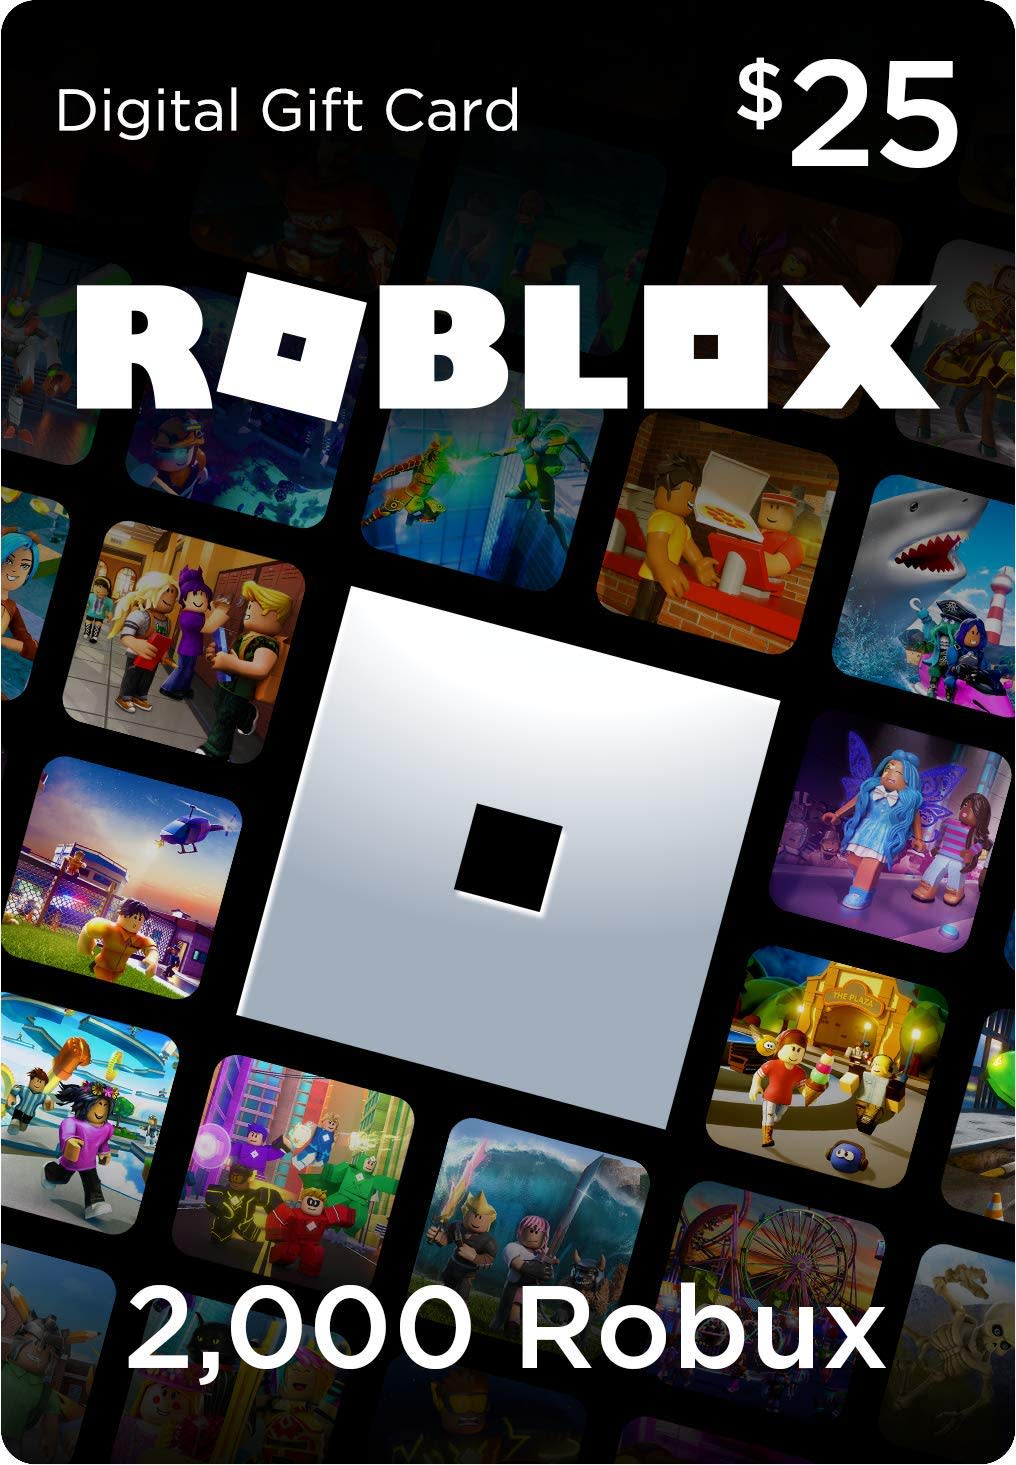 25 Roblox Gift Card Stgregs Bid Now 43 - roblox gift card auction